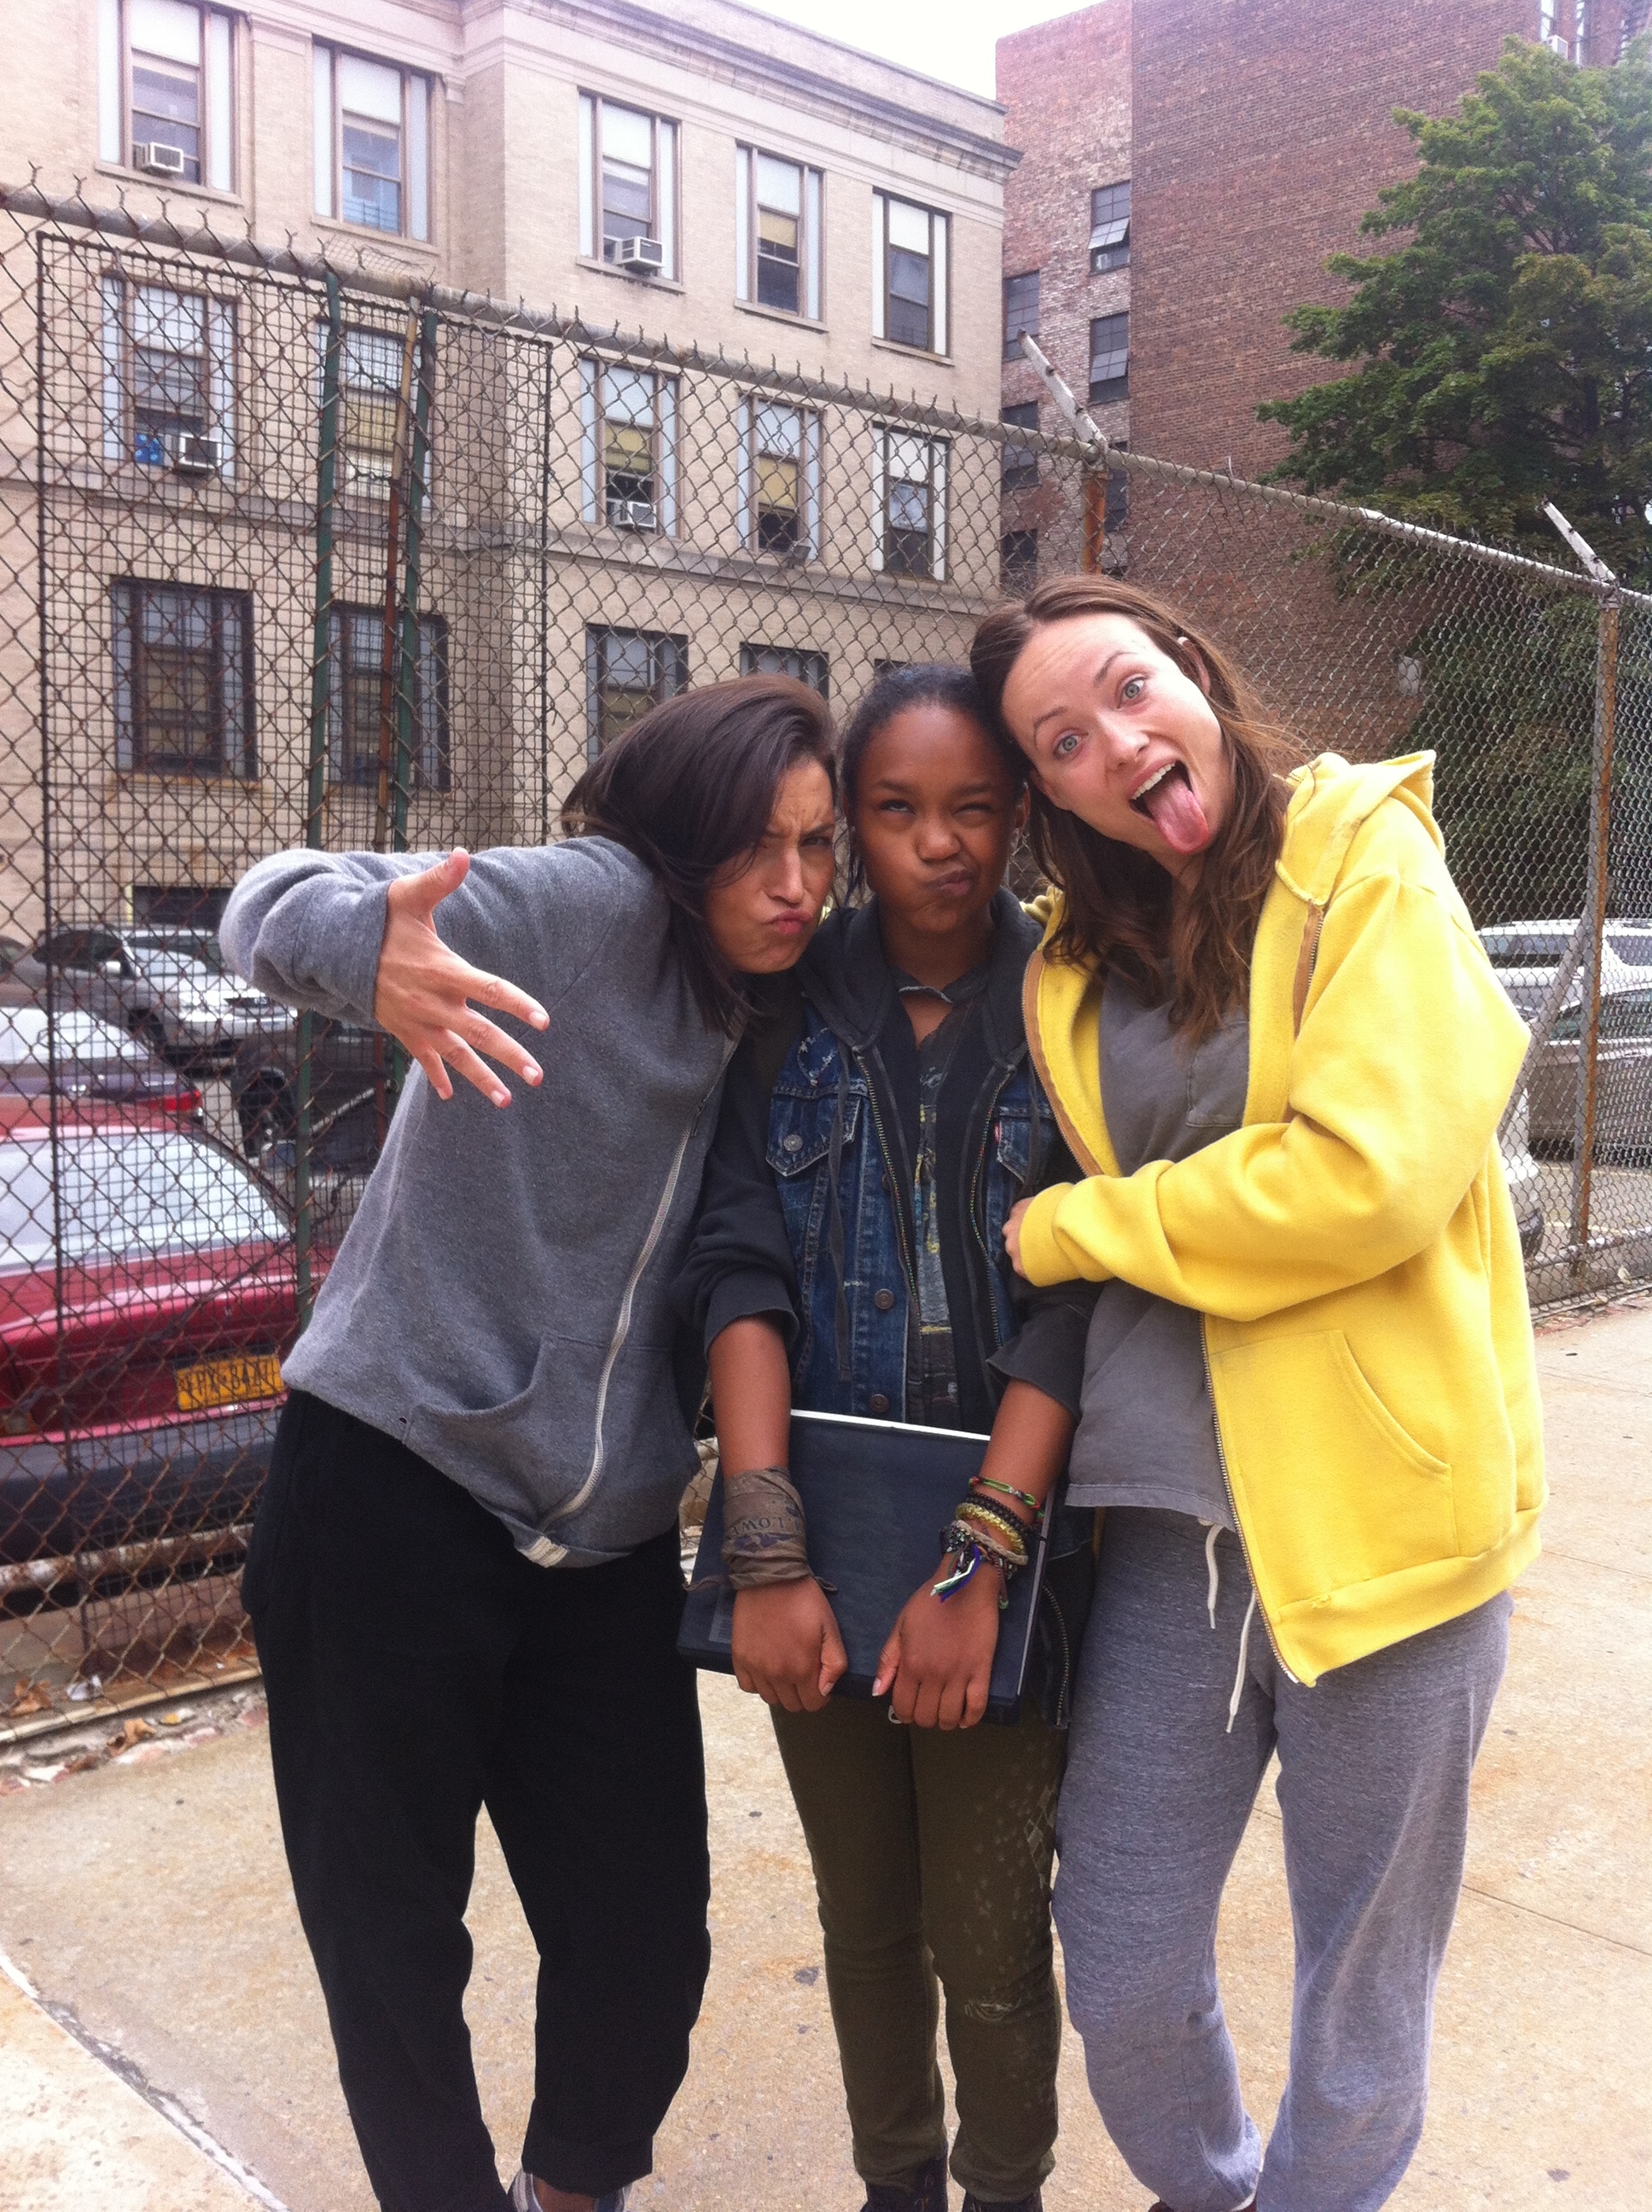 Reed Morano, Eden and Olivia Wilde the last day of her filming Meadowland. Please note the school books in her hands.